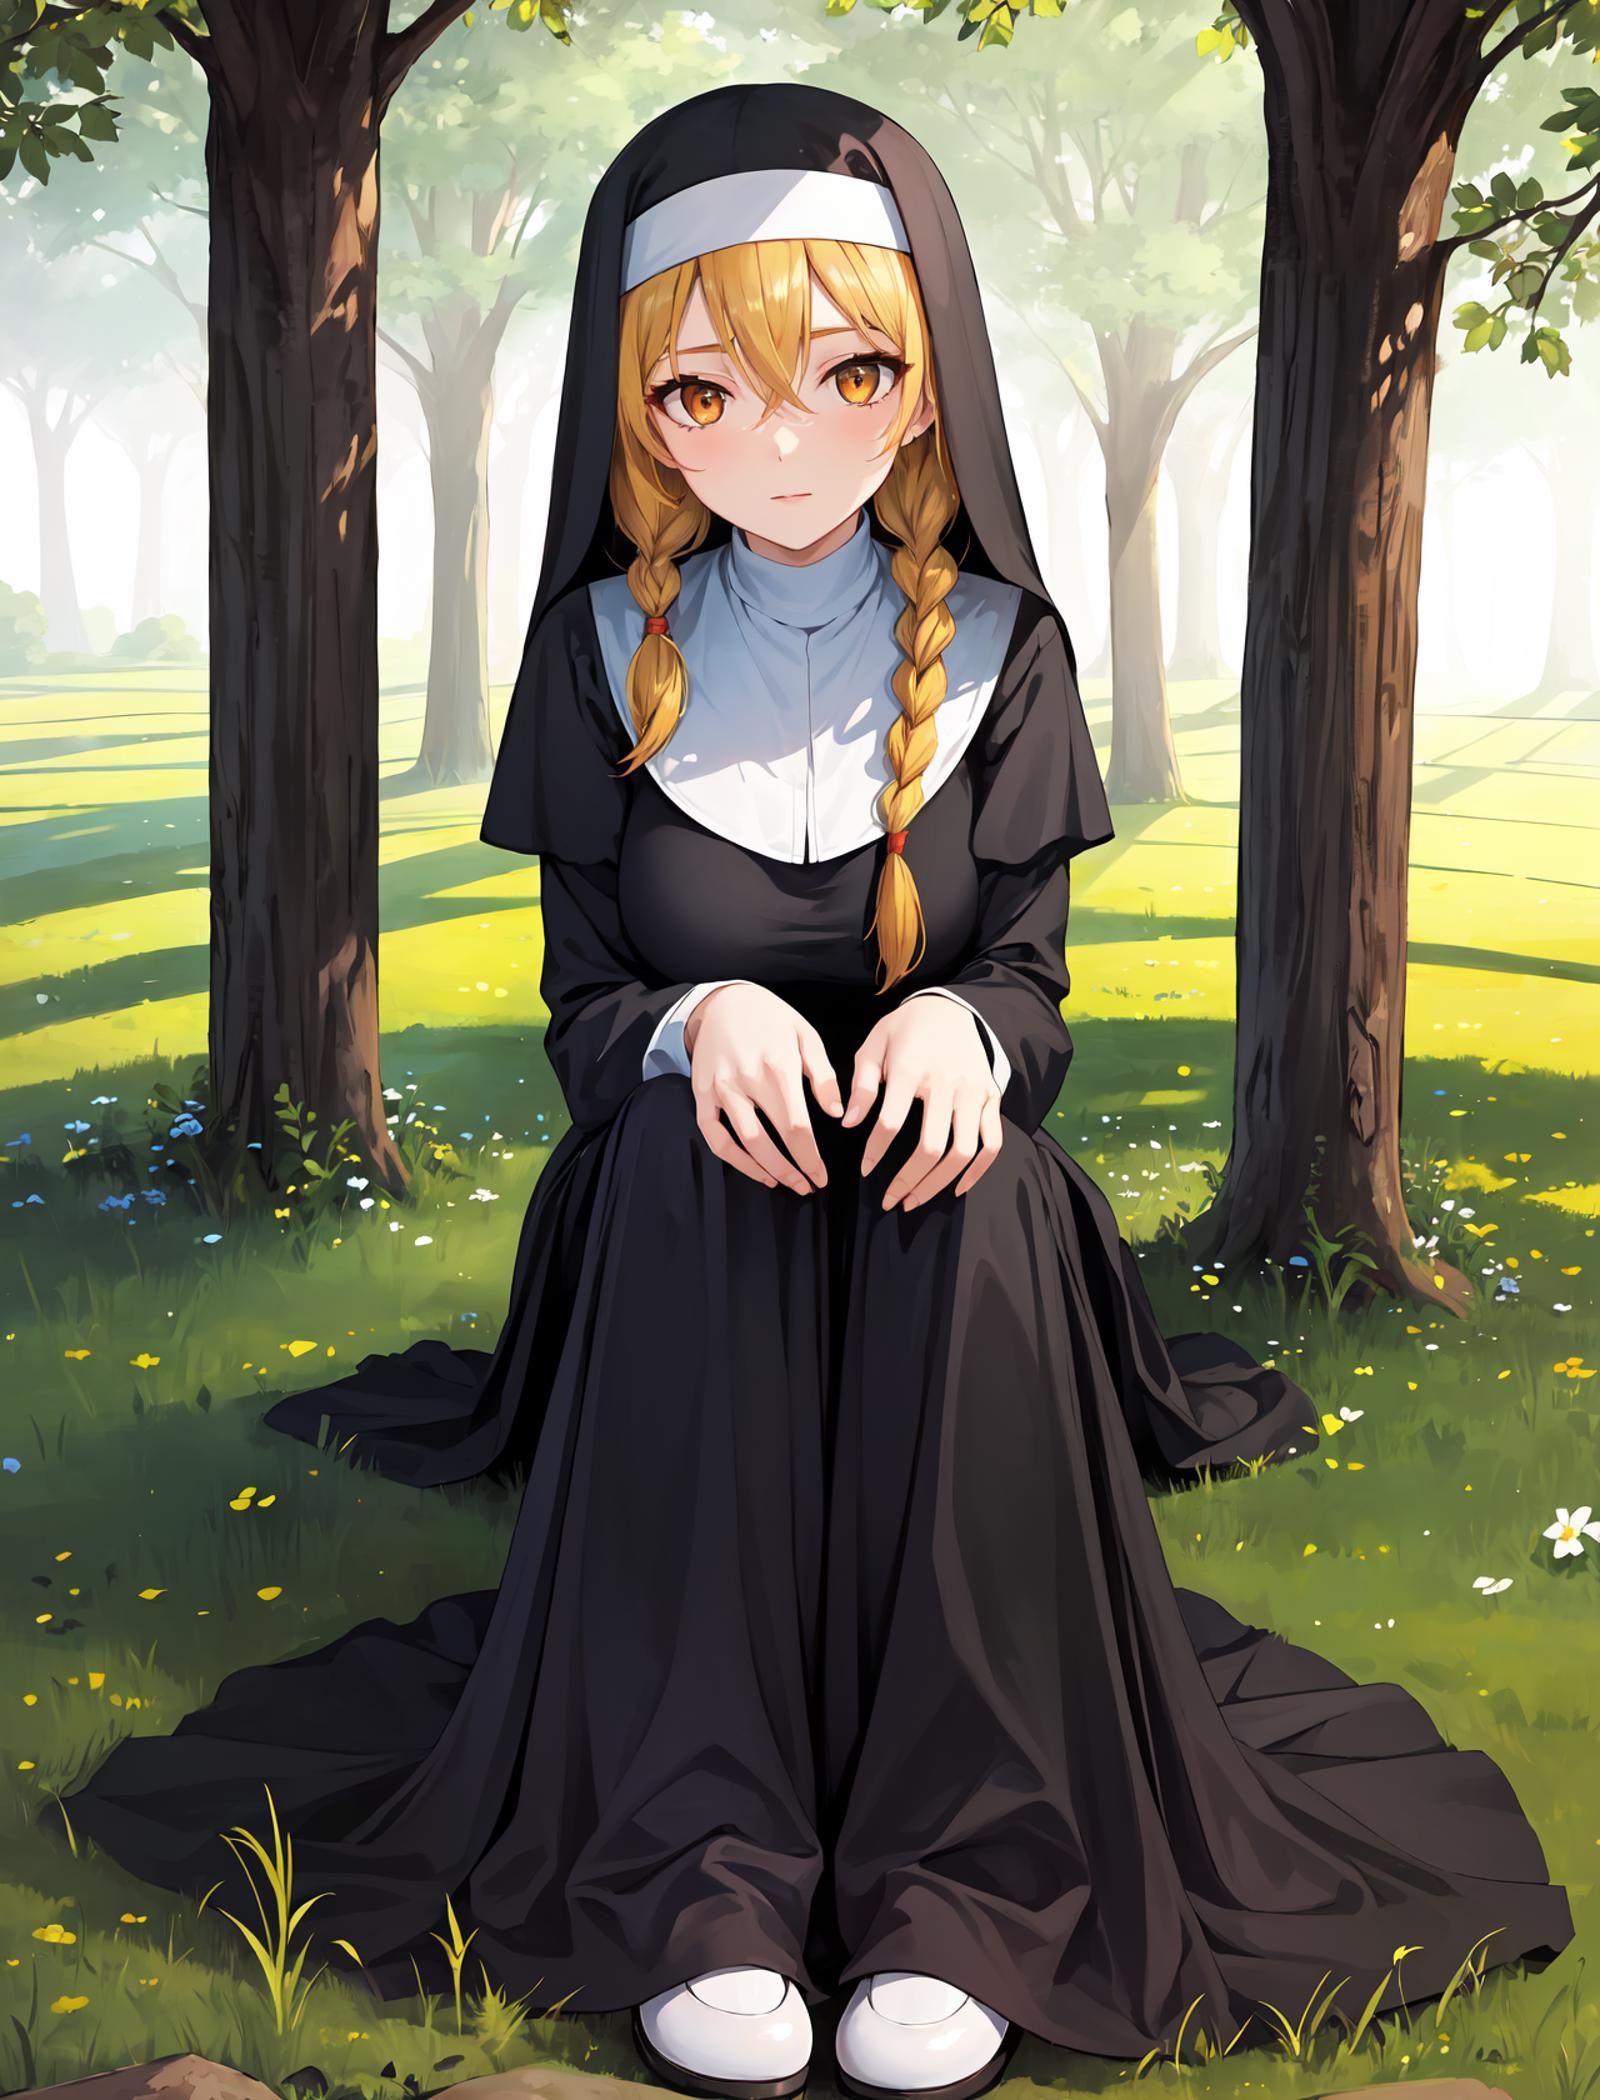 LoRA / Concept | Nun image by Gwess